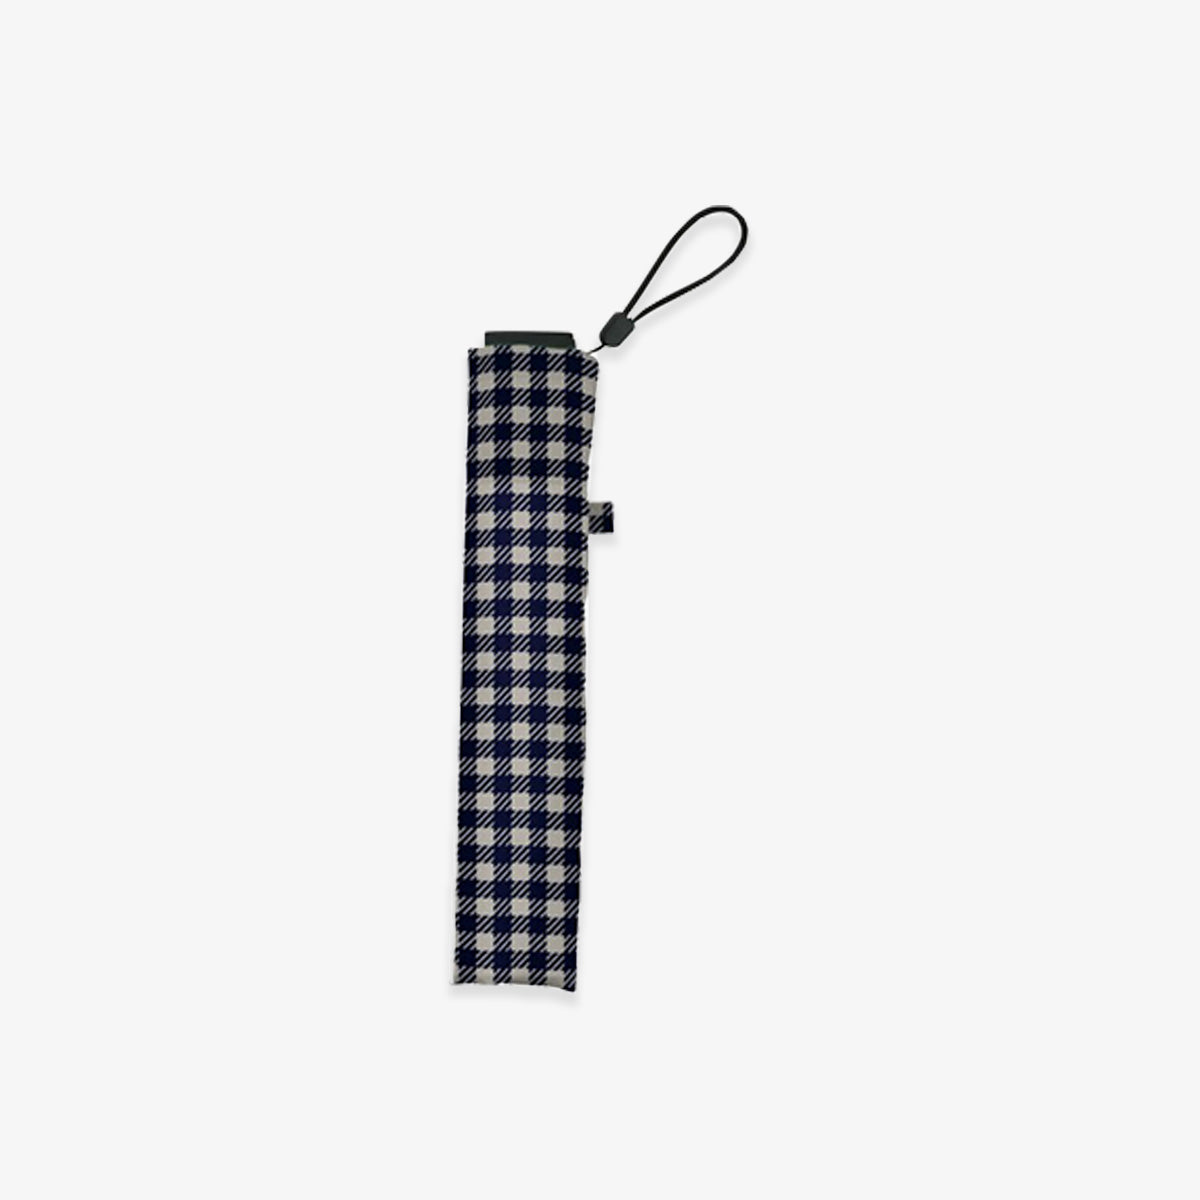 PARAPLY // GINGHAM TERN